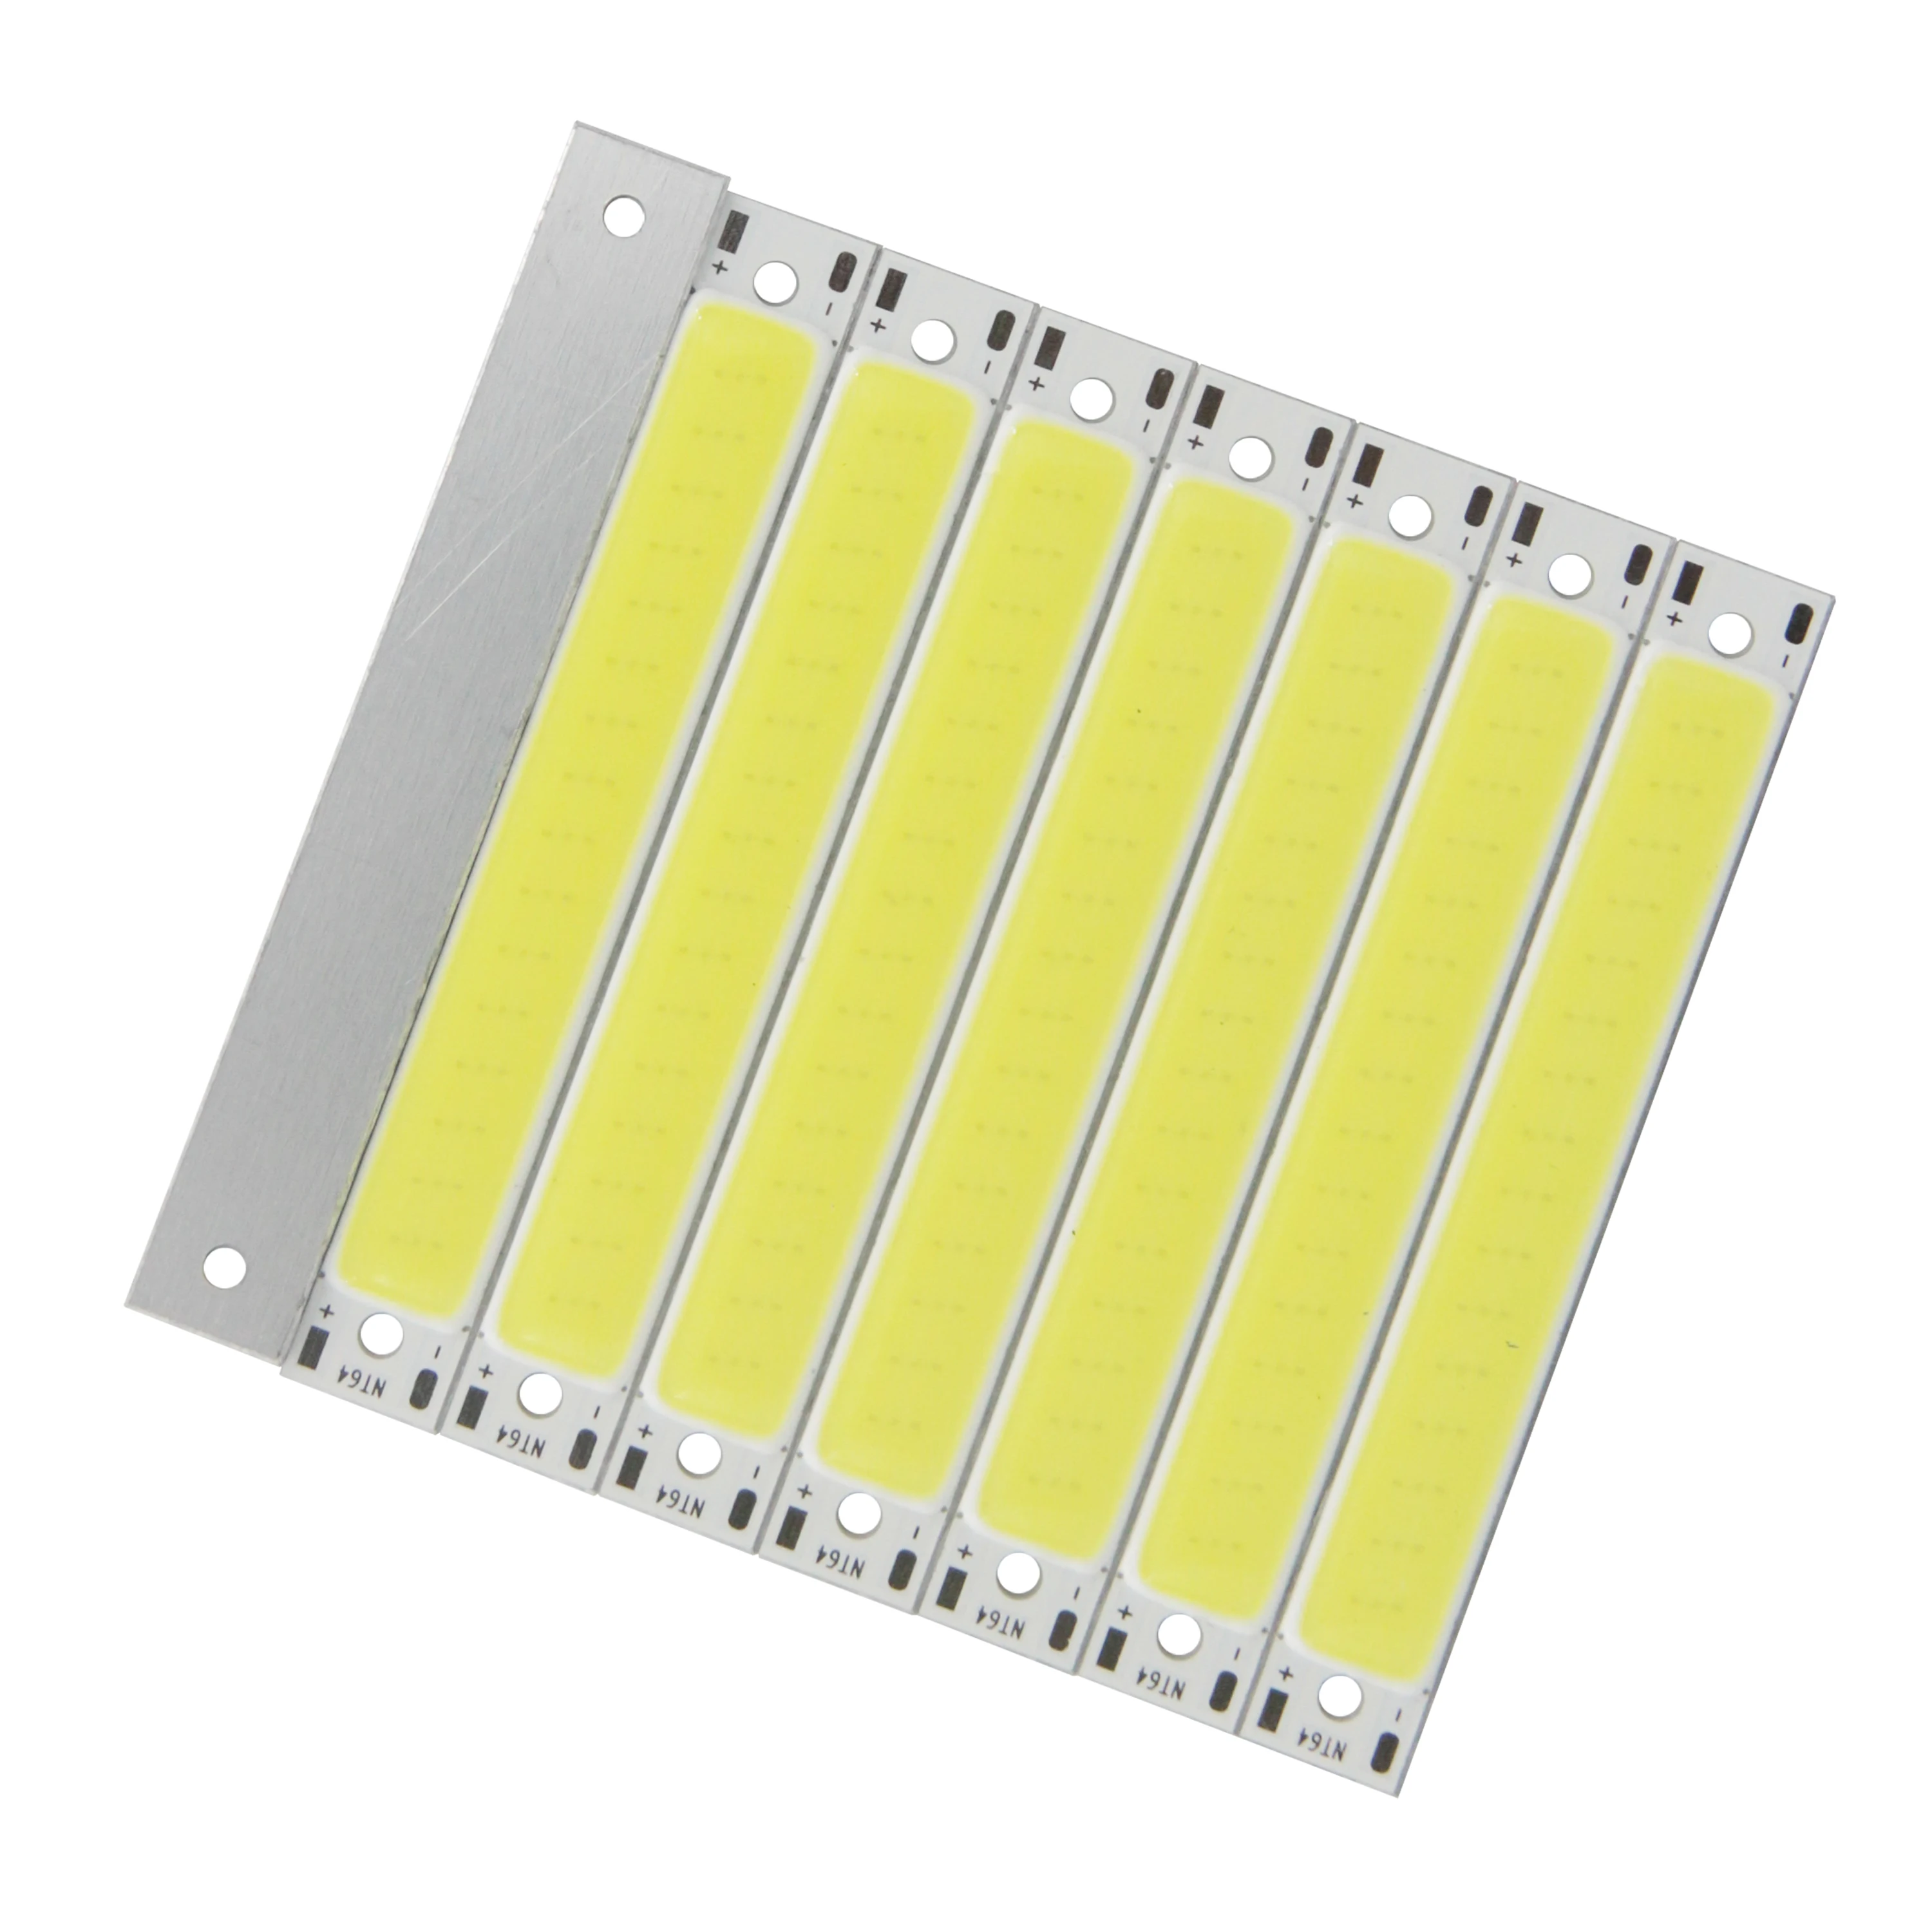 hot sale 3V 3.7V DC 60mm 8mm LED COB Strip 1.5W 3W Warm Cold White Blue Red COB LED light source for DIY Bicycle work lamp images - 6